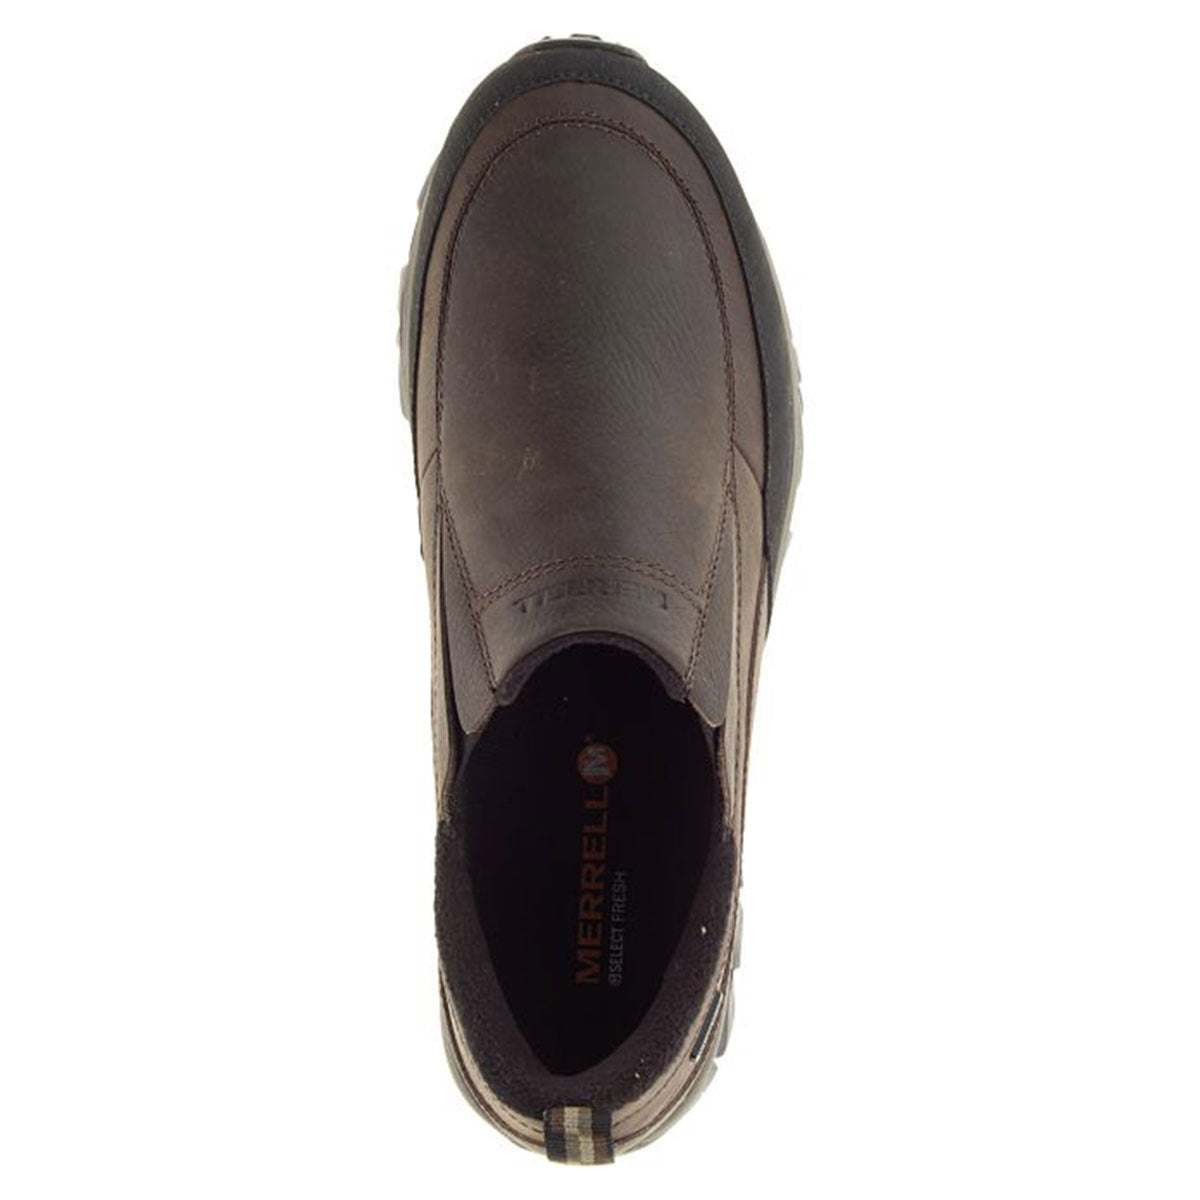 Top view of a brown Merrell COLDPACK ICE + MOC WP waterproof slip-on shoe.